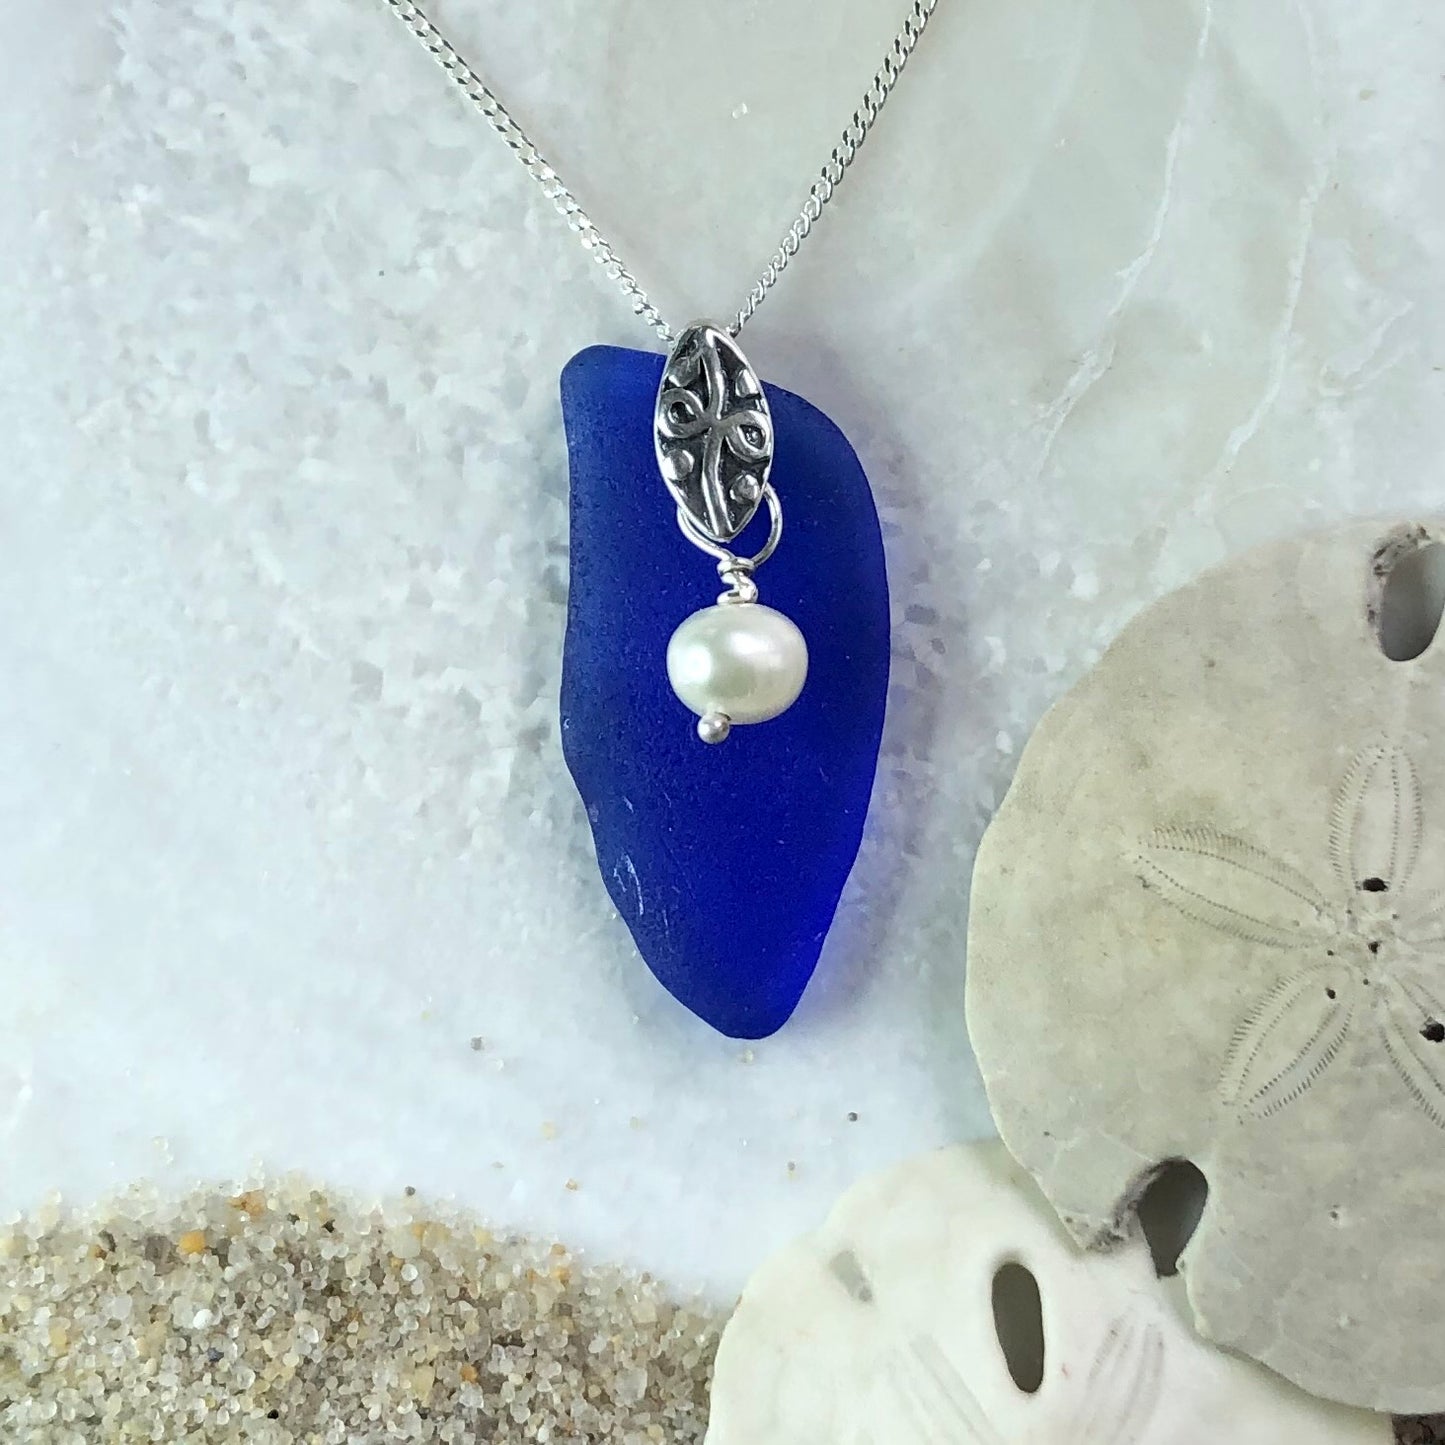 Cobalt Blue Seaglass Necklace with Fresh Water Pearl